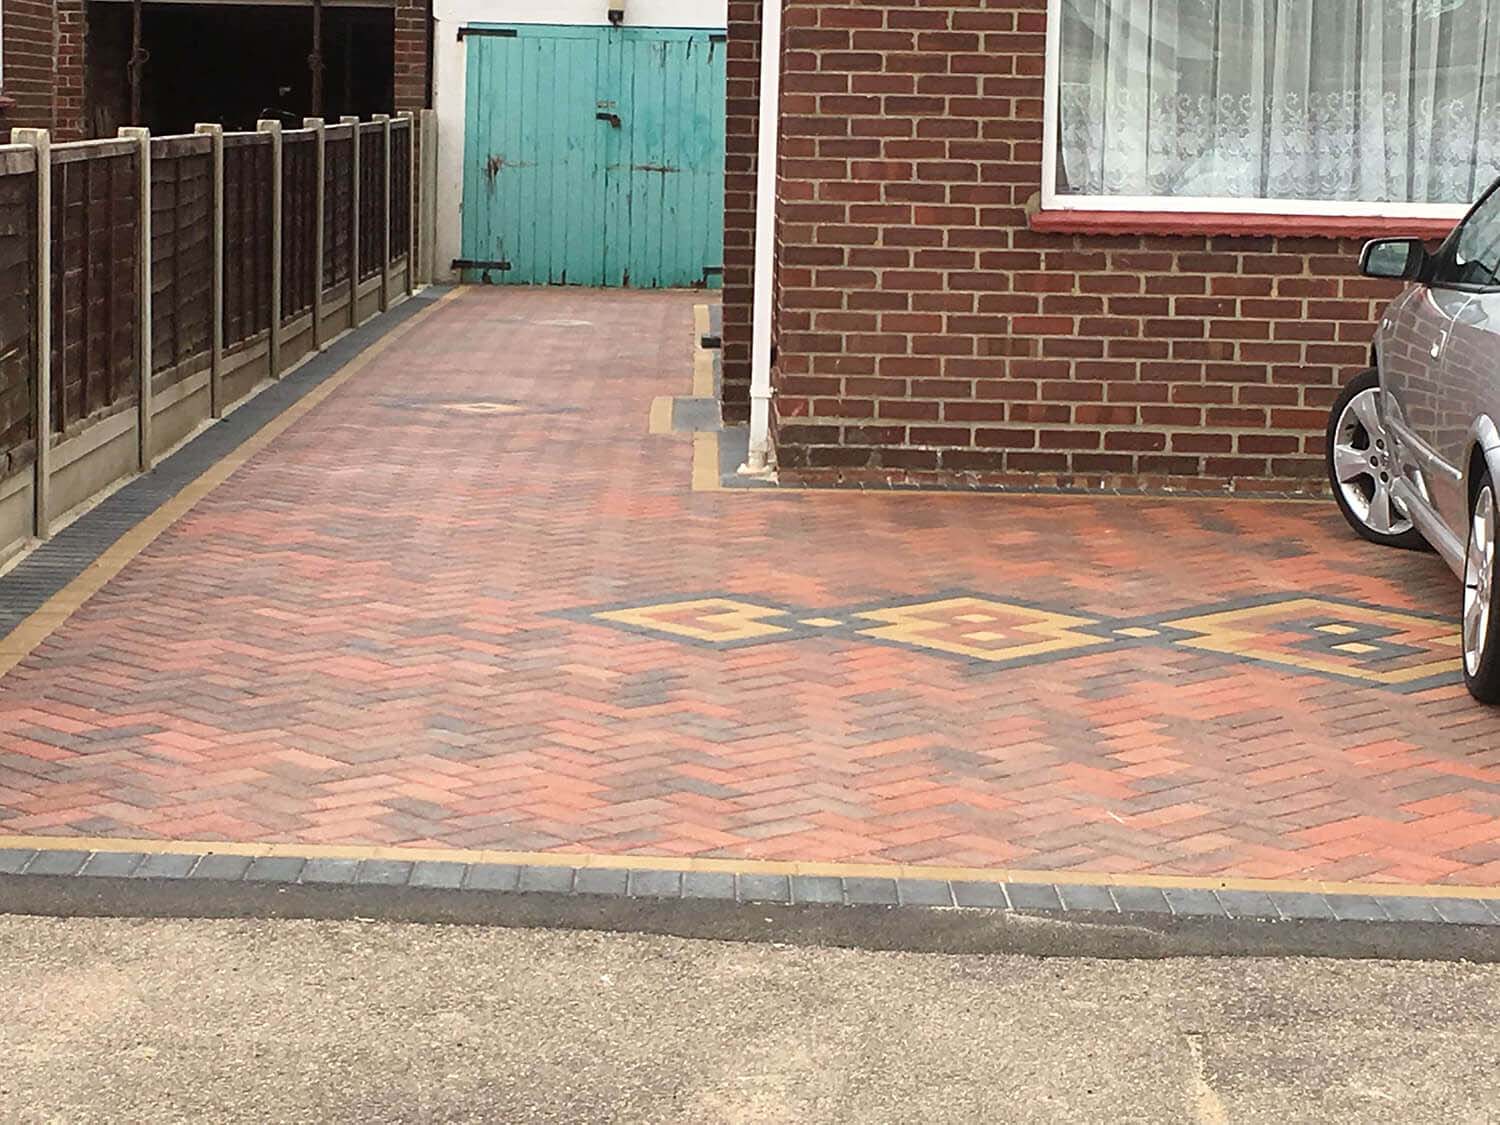 Paving Contractors Near Me in Chester